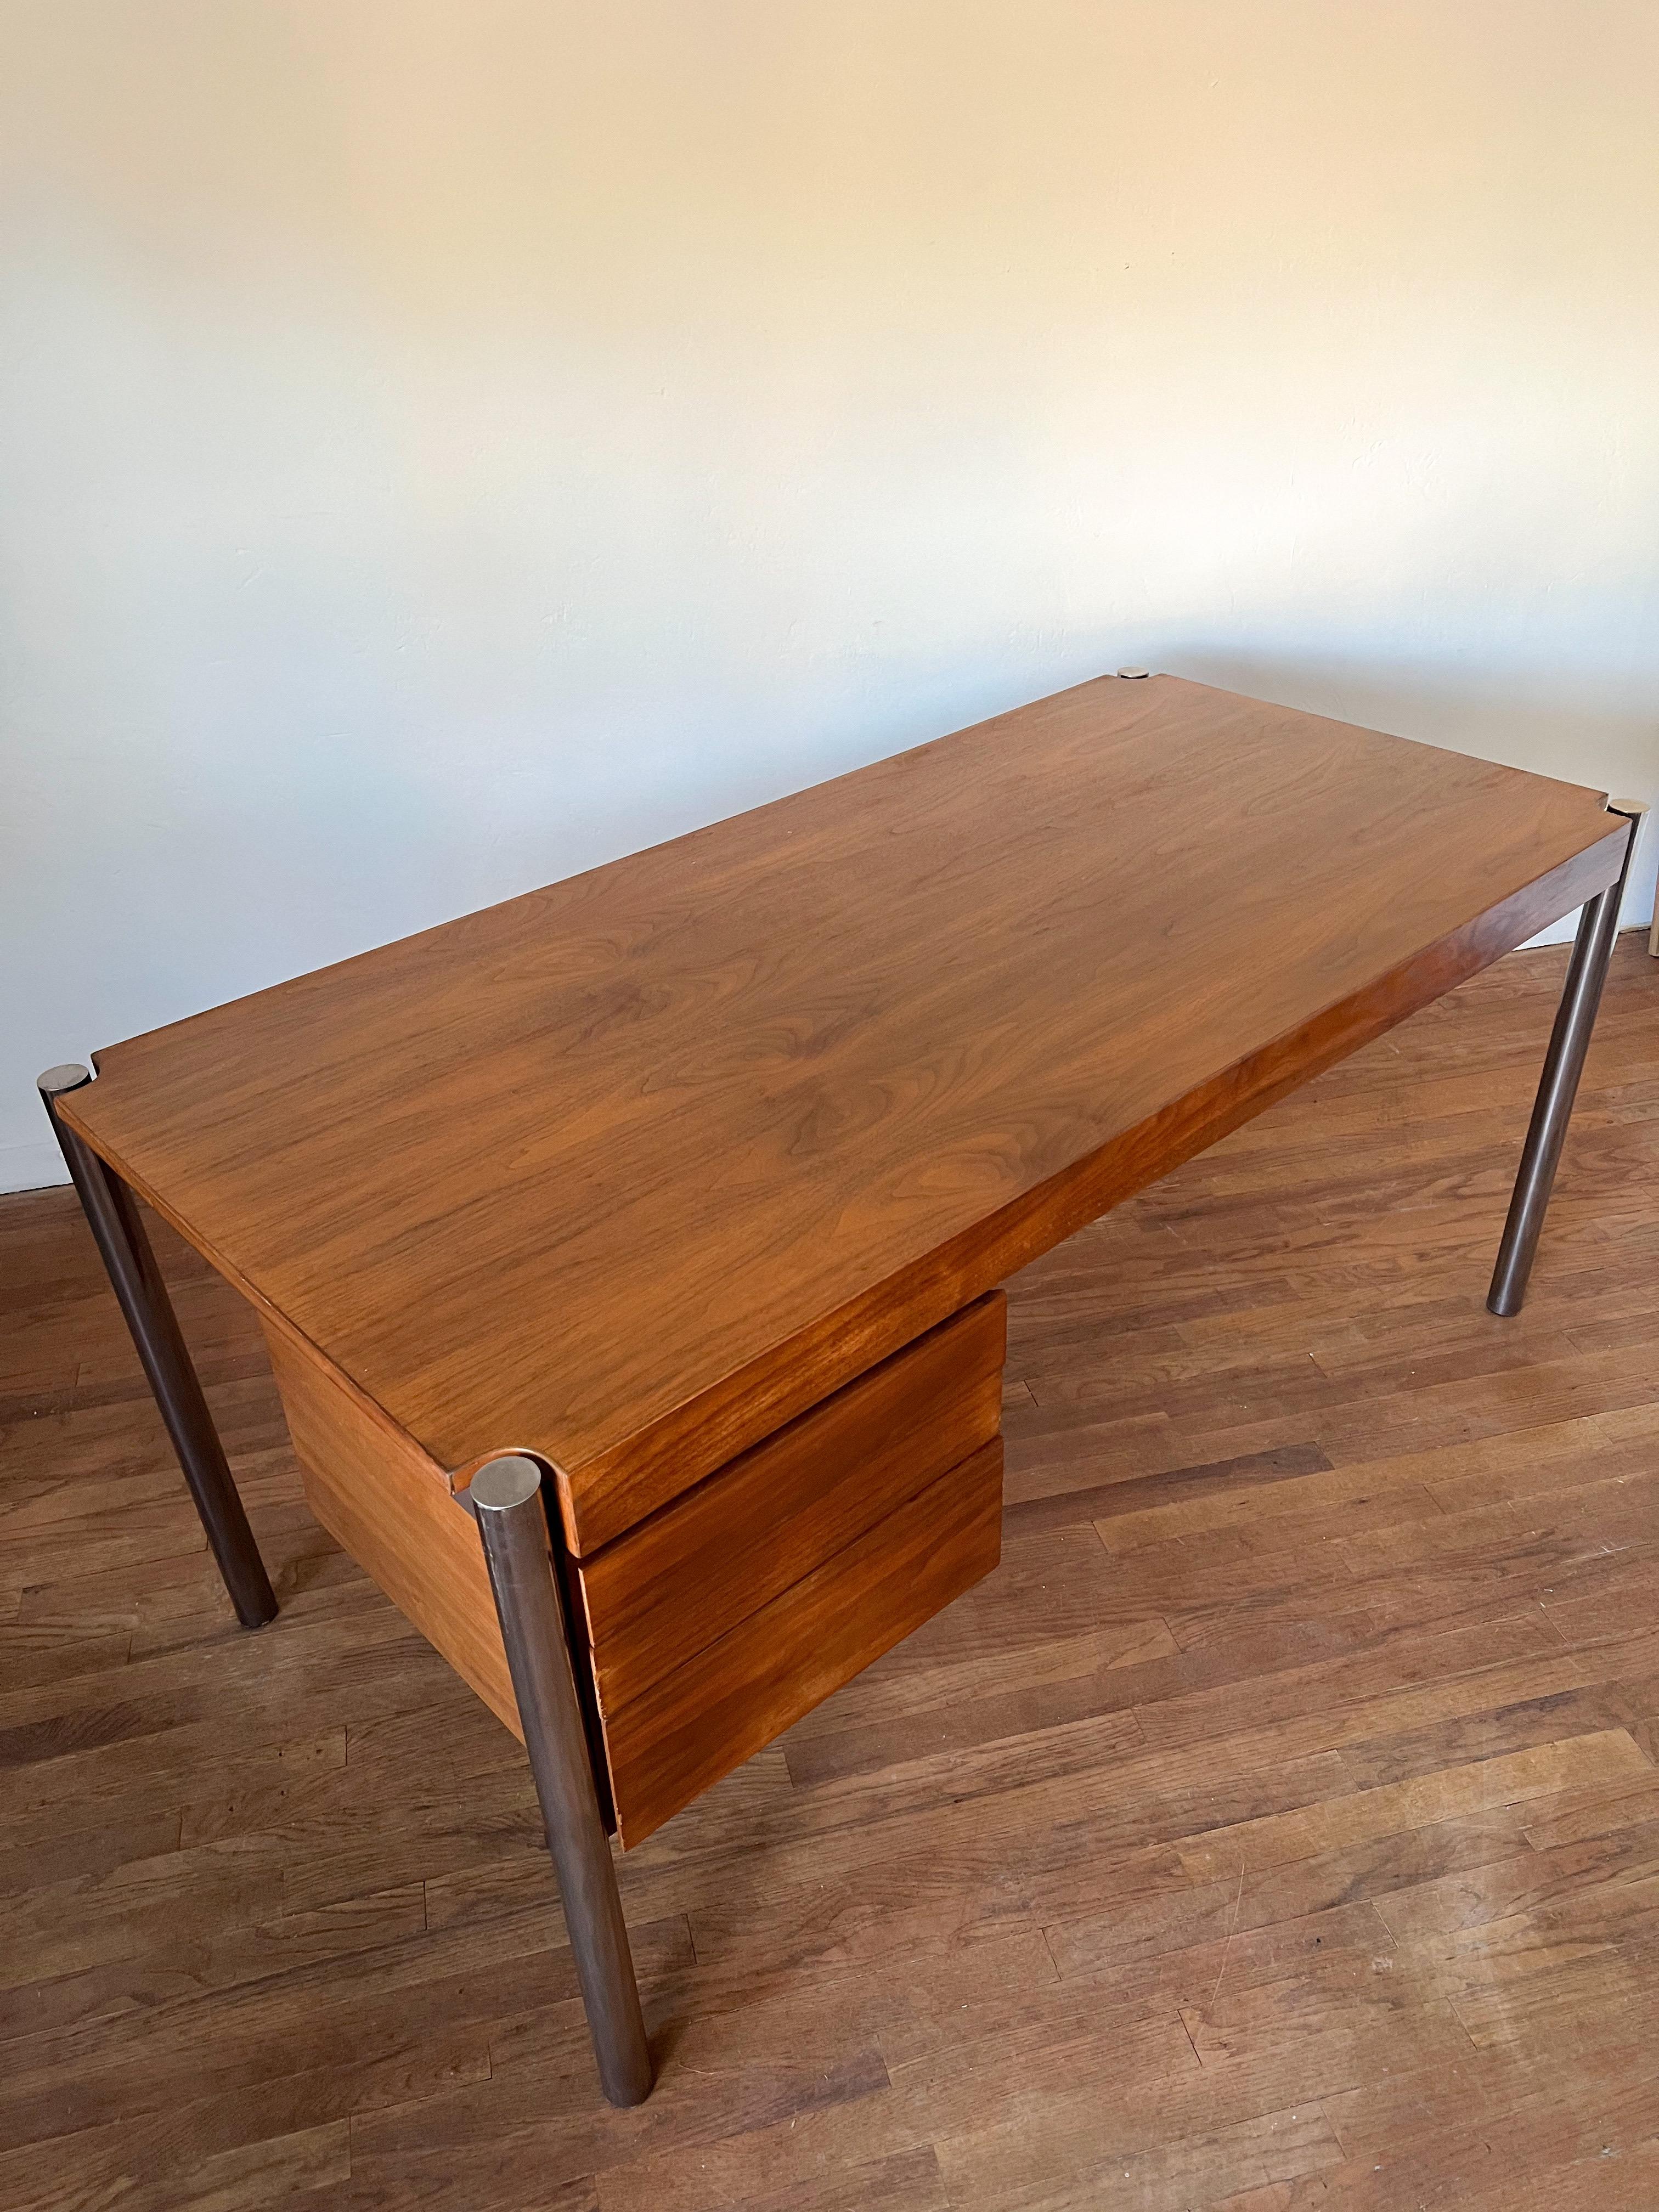 Beautiful executive desk designed by Jens Risom and manufactured by Howe Furniture in the 1970s. This desk features an elegantly broad top with three spacious drawers in walnut, resting on very minimalistic and sculptural chrome legs that appear to